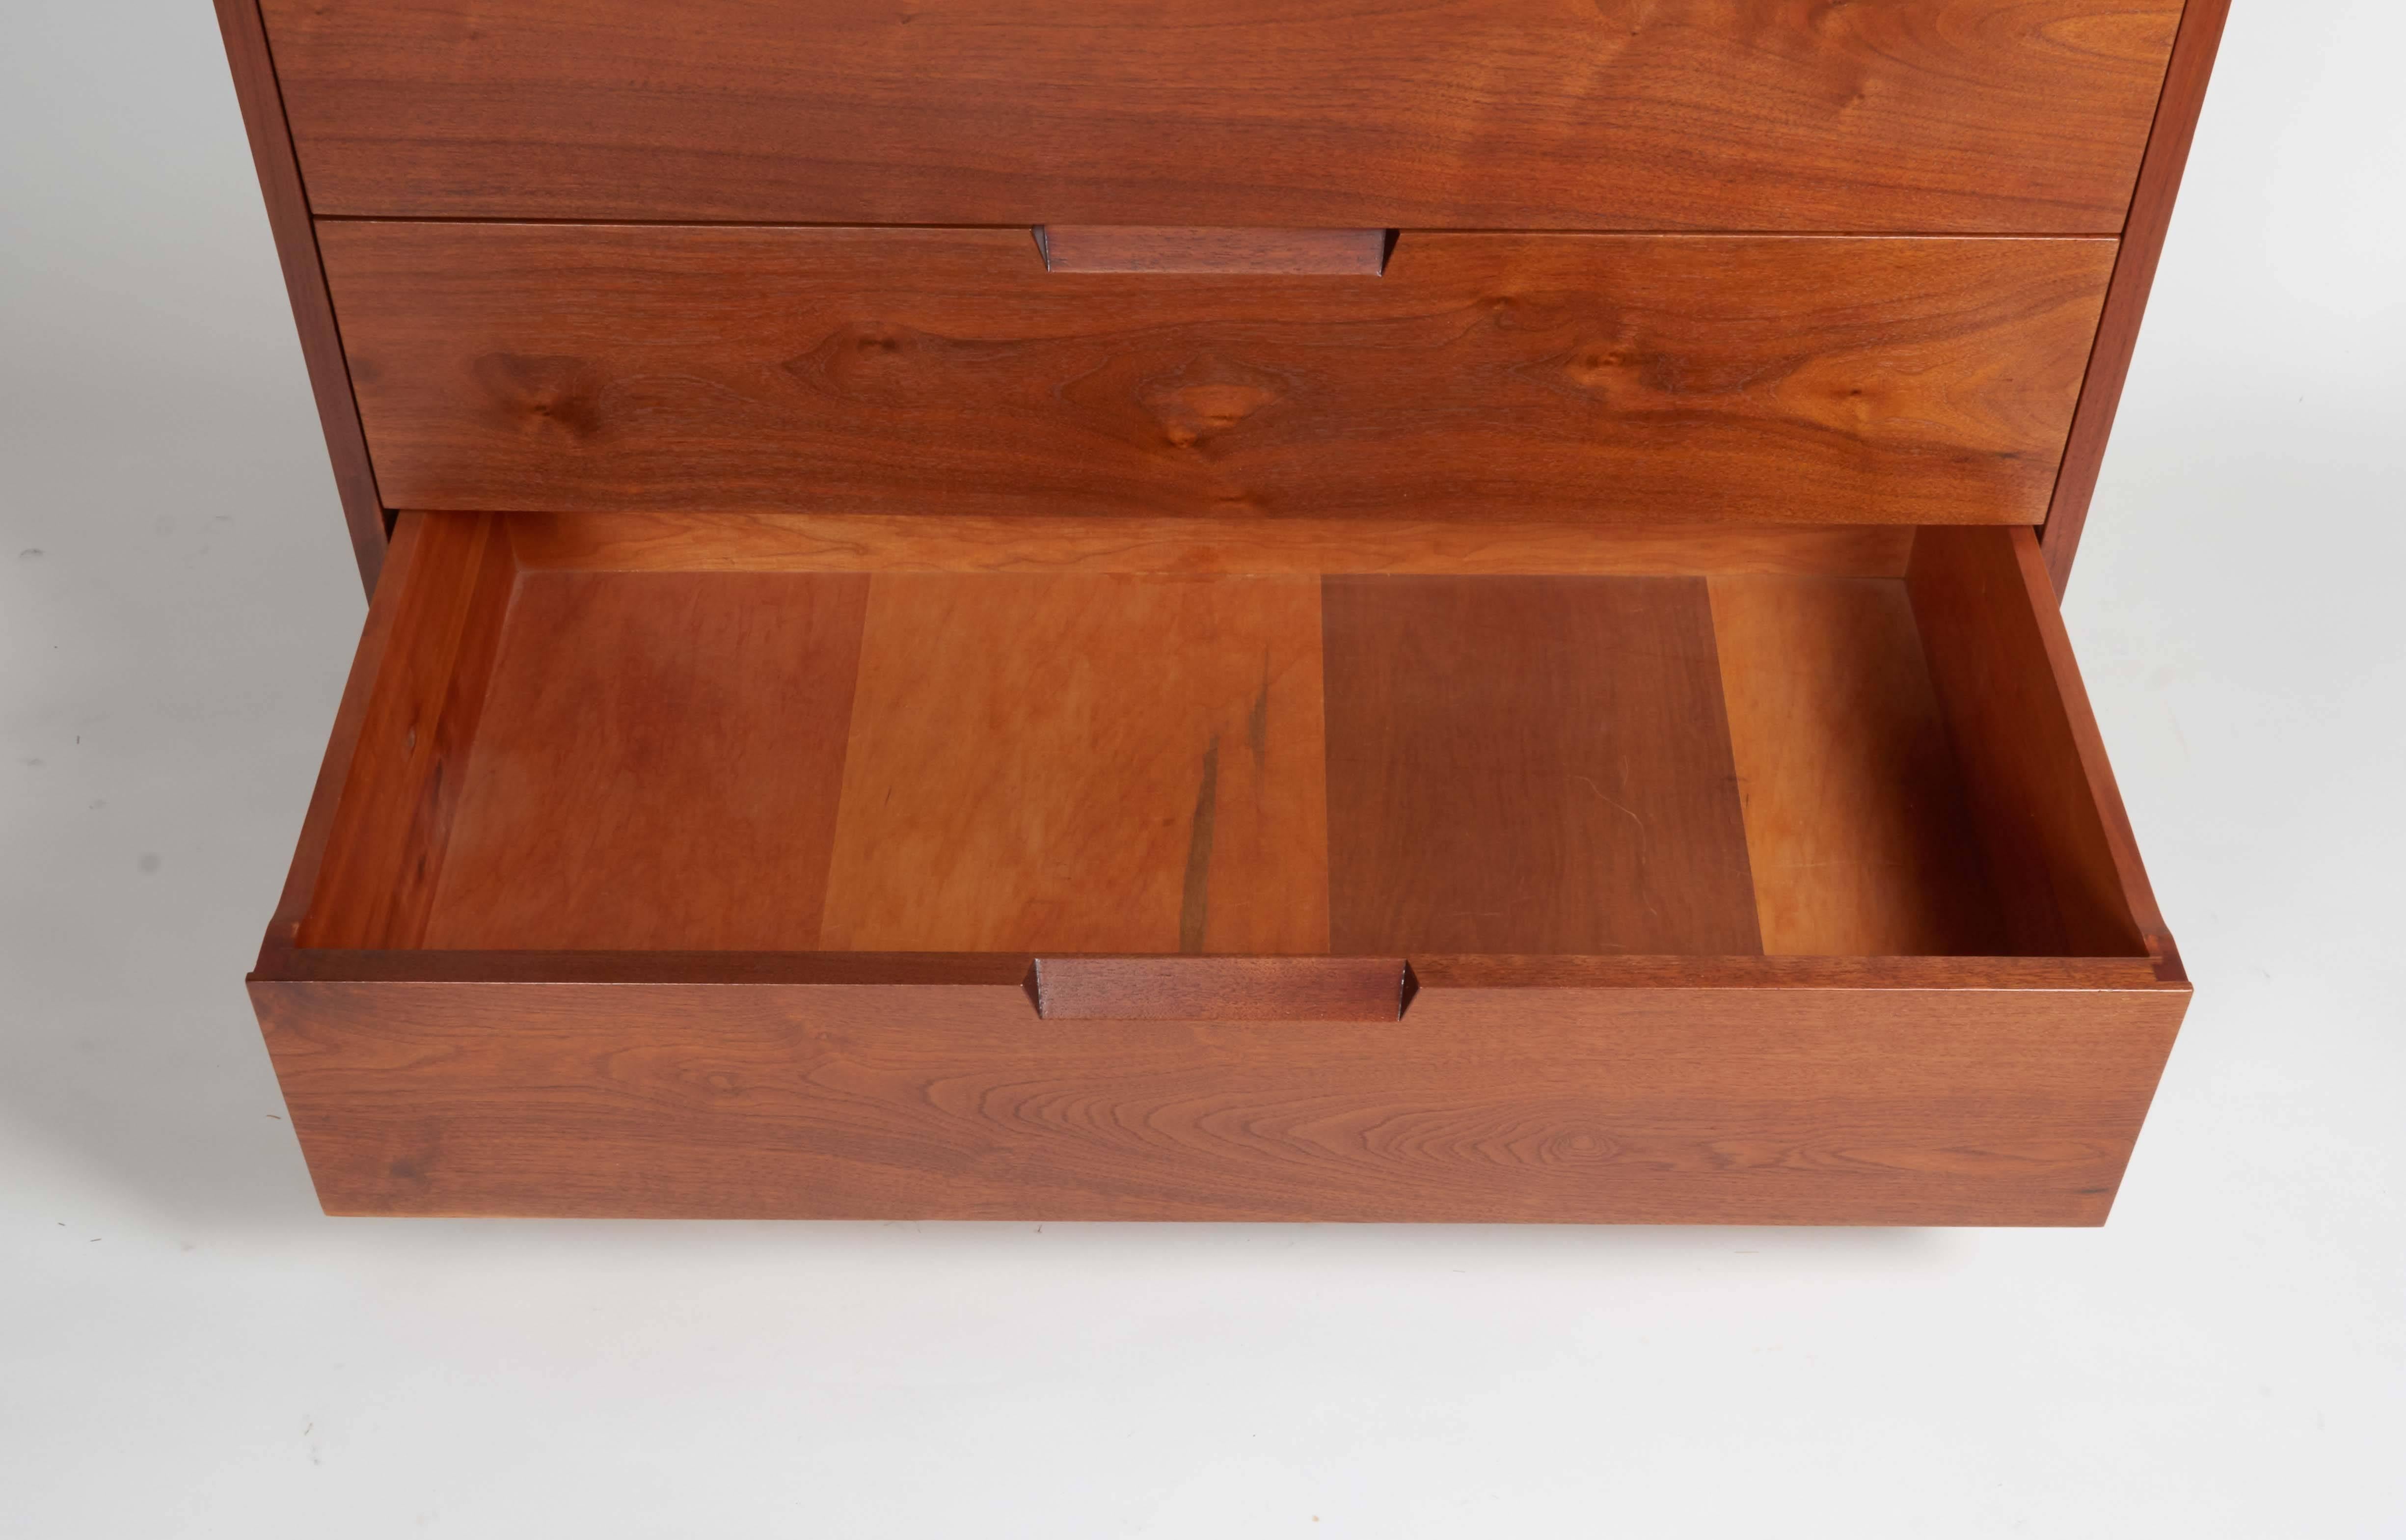 As with all of Nakashima's work the simple beauty of fine craftsmanship and superior quality woods make this an outstanding piece of furniture.